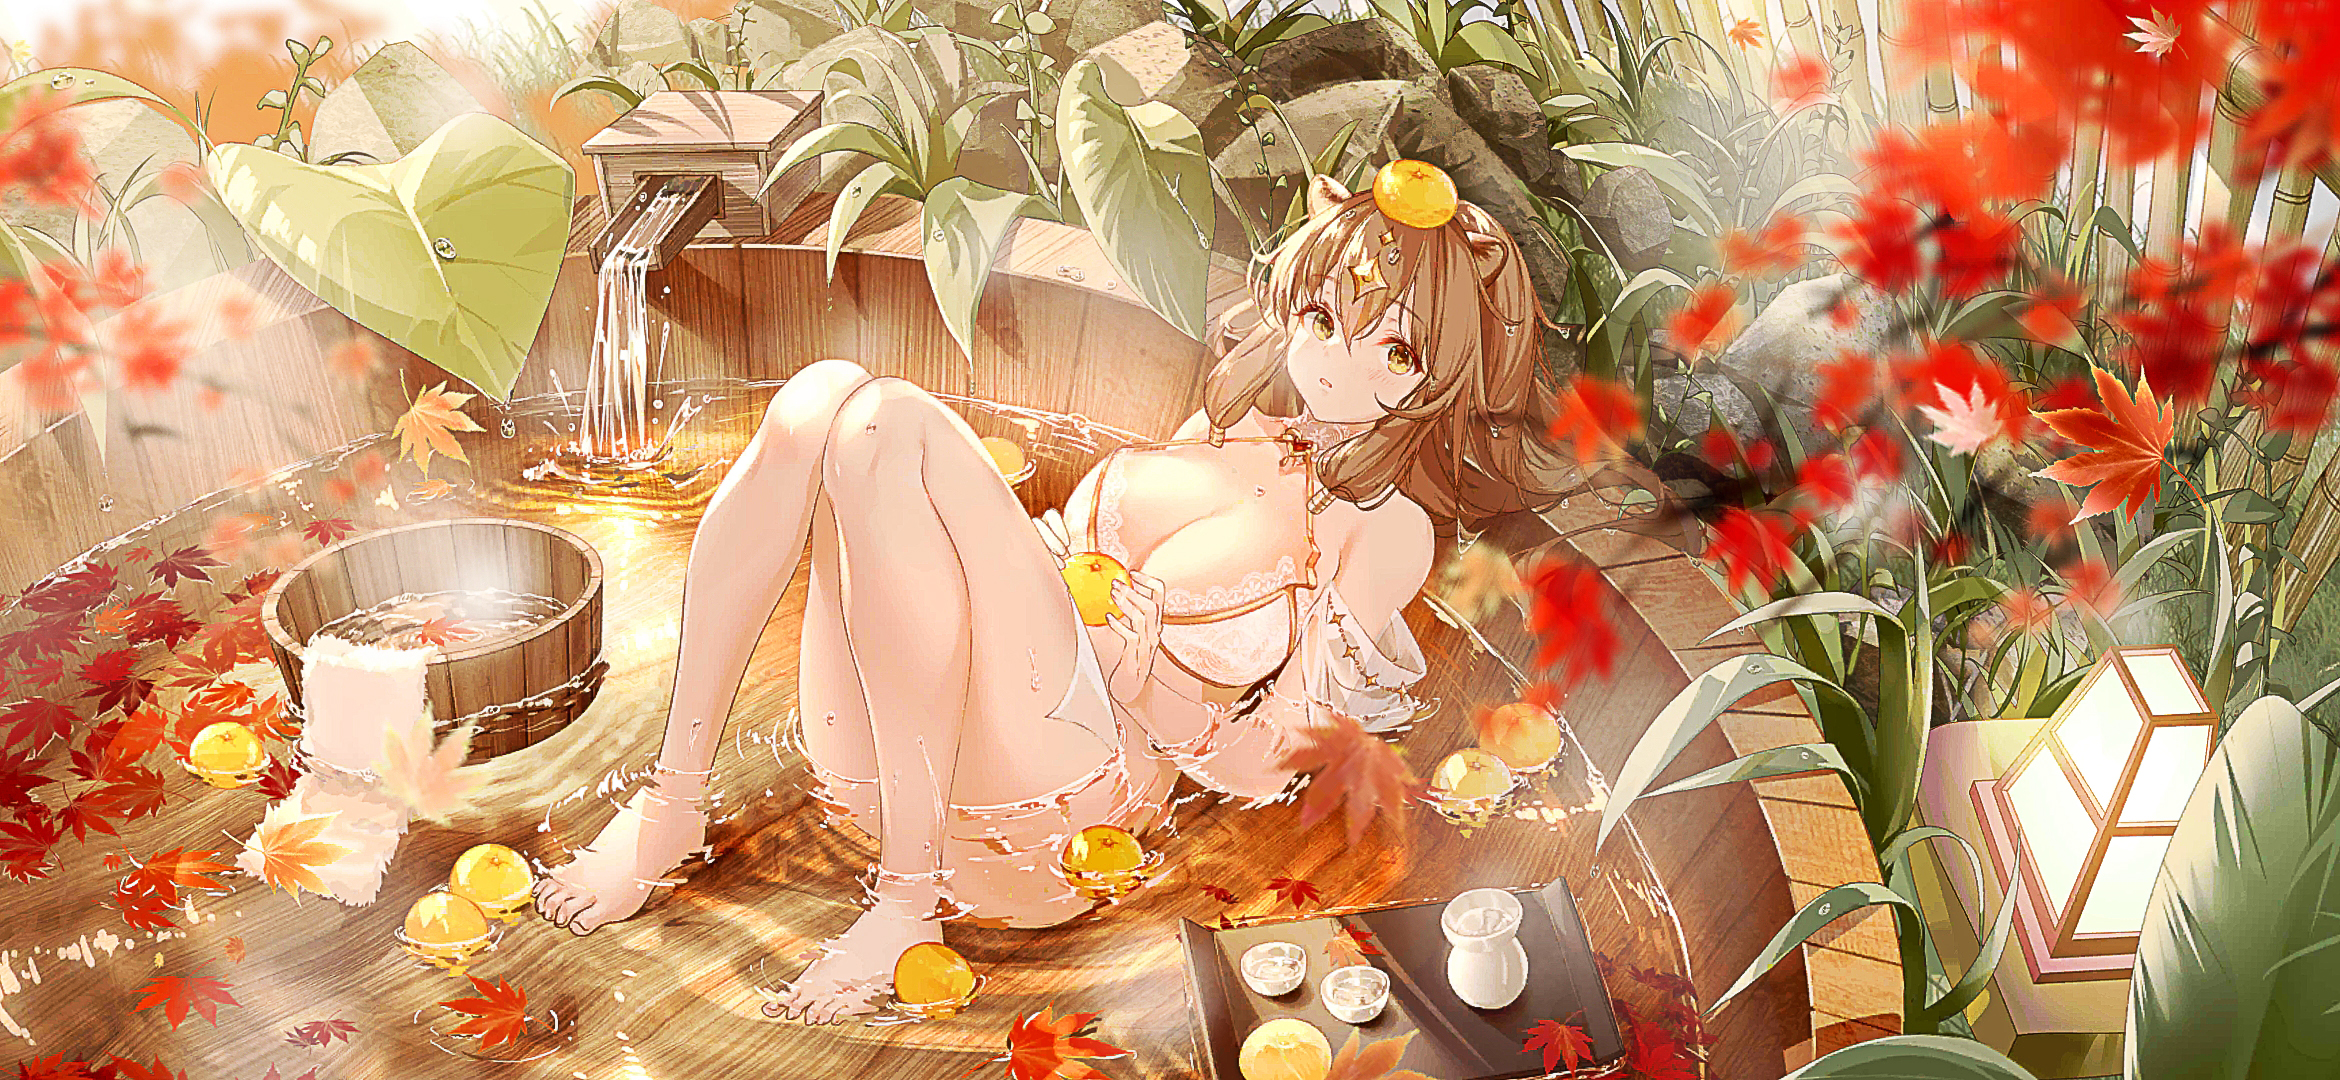 Maiden 039 S Tower Bath Towel Bathrobes Anime Girls Anime Games Game Characters Leaves 2340x1080